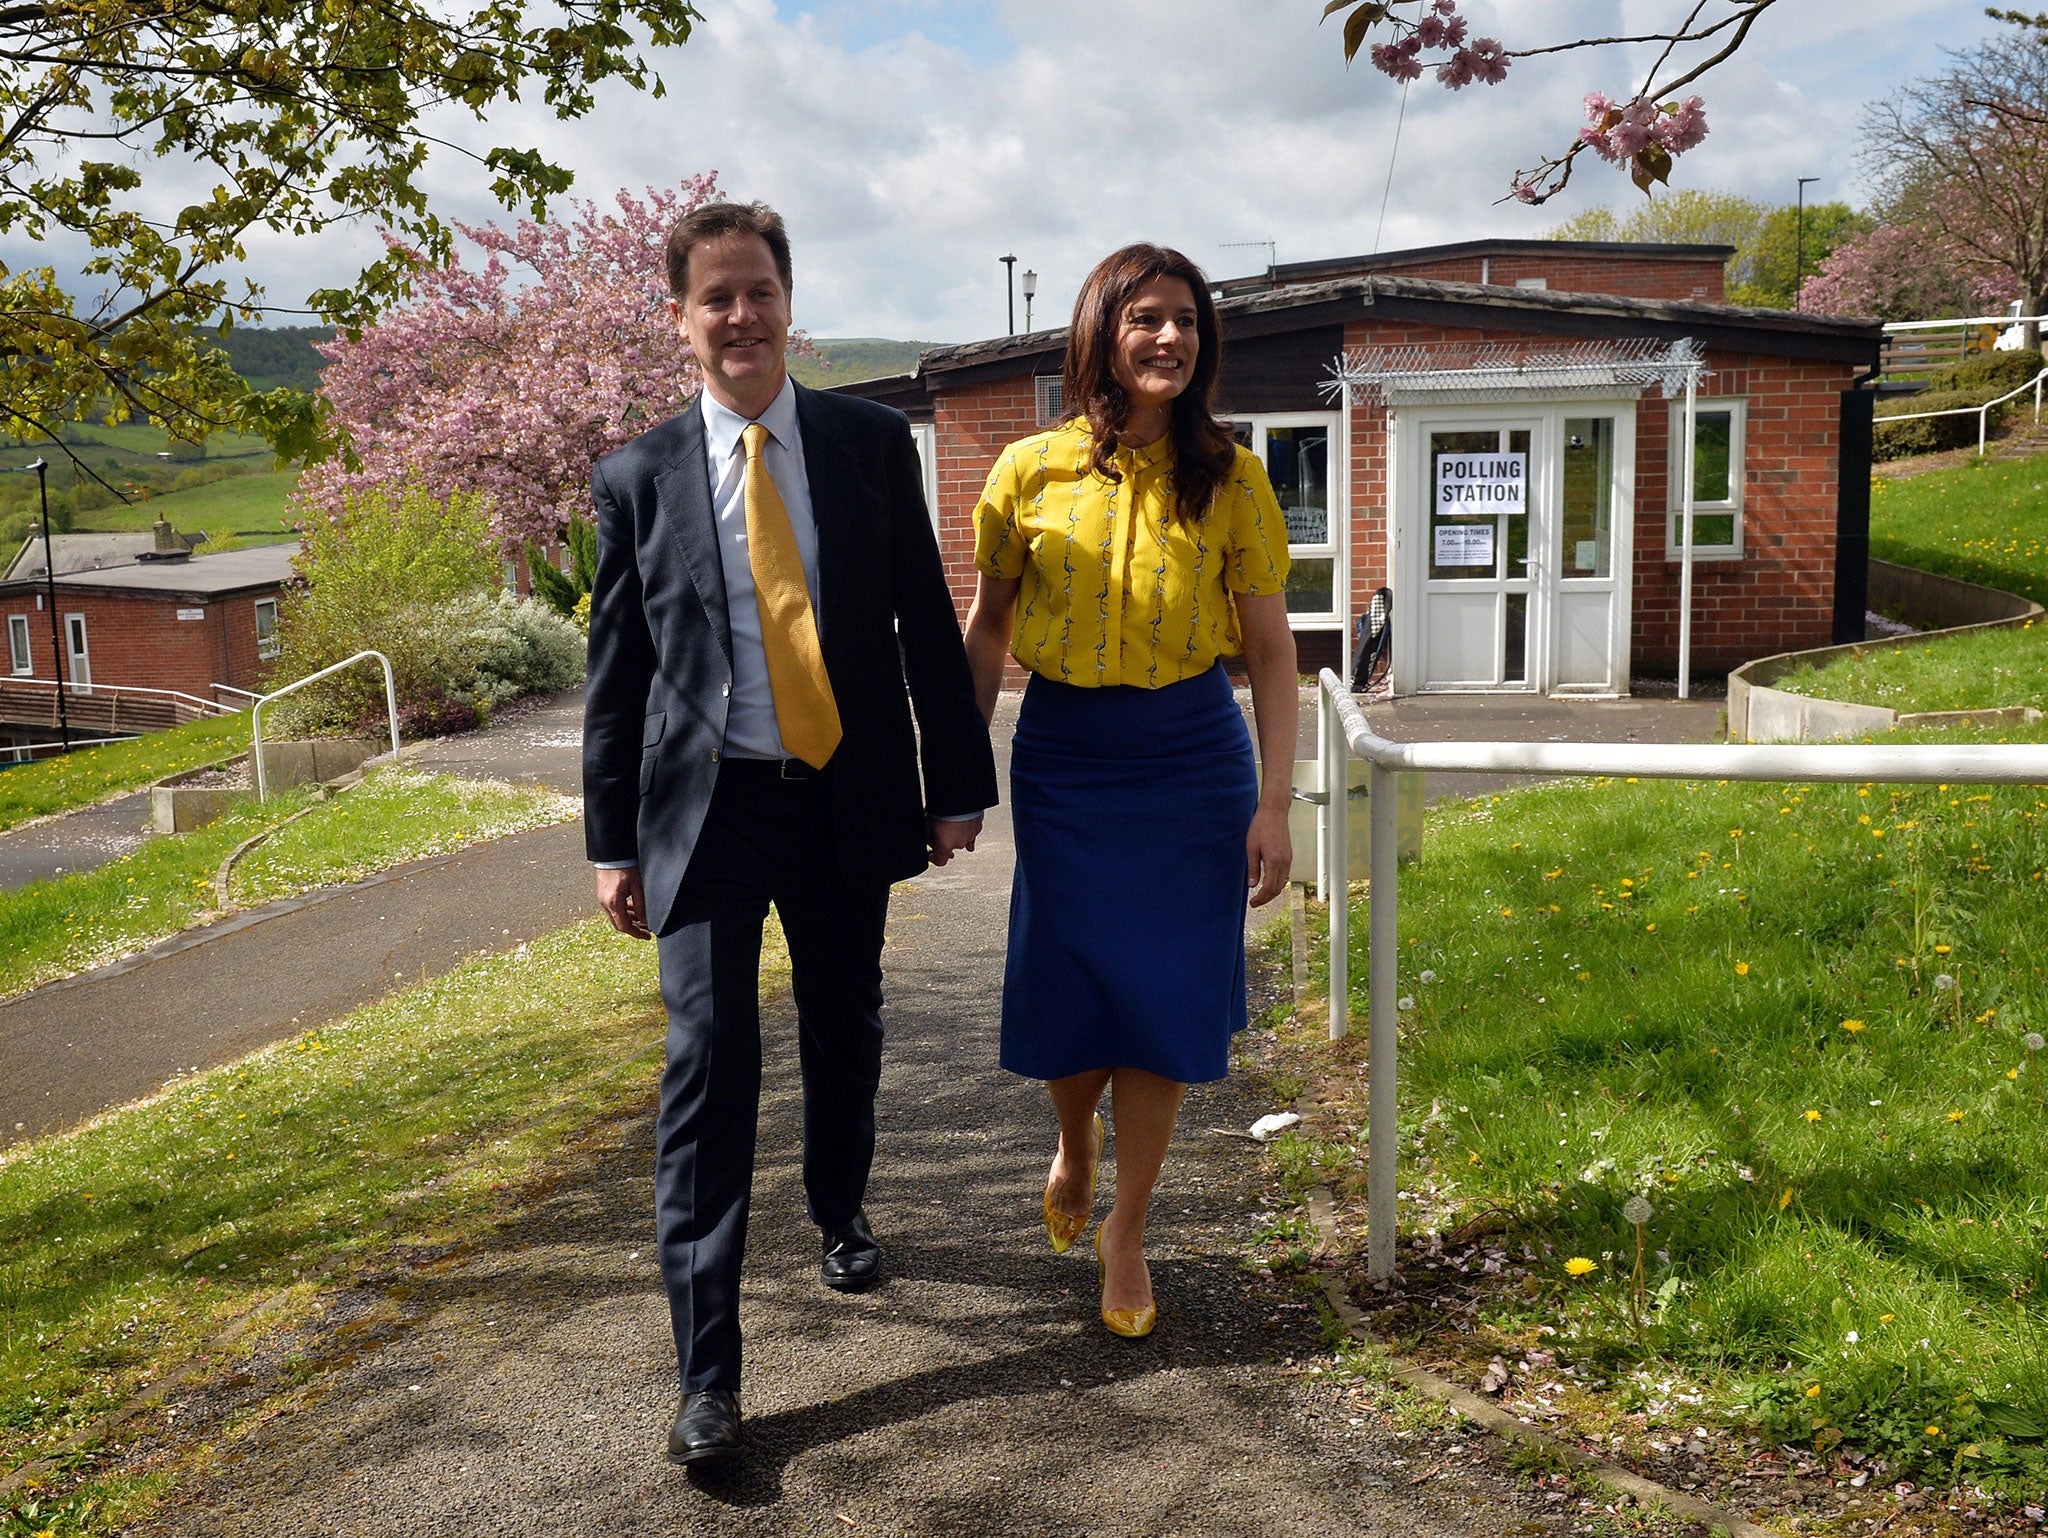 Leader of the Liberal Democrat party Nick Clegg (L) and his wife Miriam Gonzalez Durantez leave after voting at Hall Park centre polling station in Sheffield, England on May 7, 2015